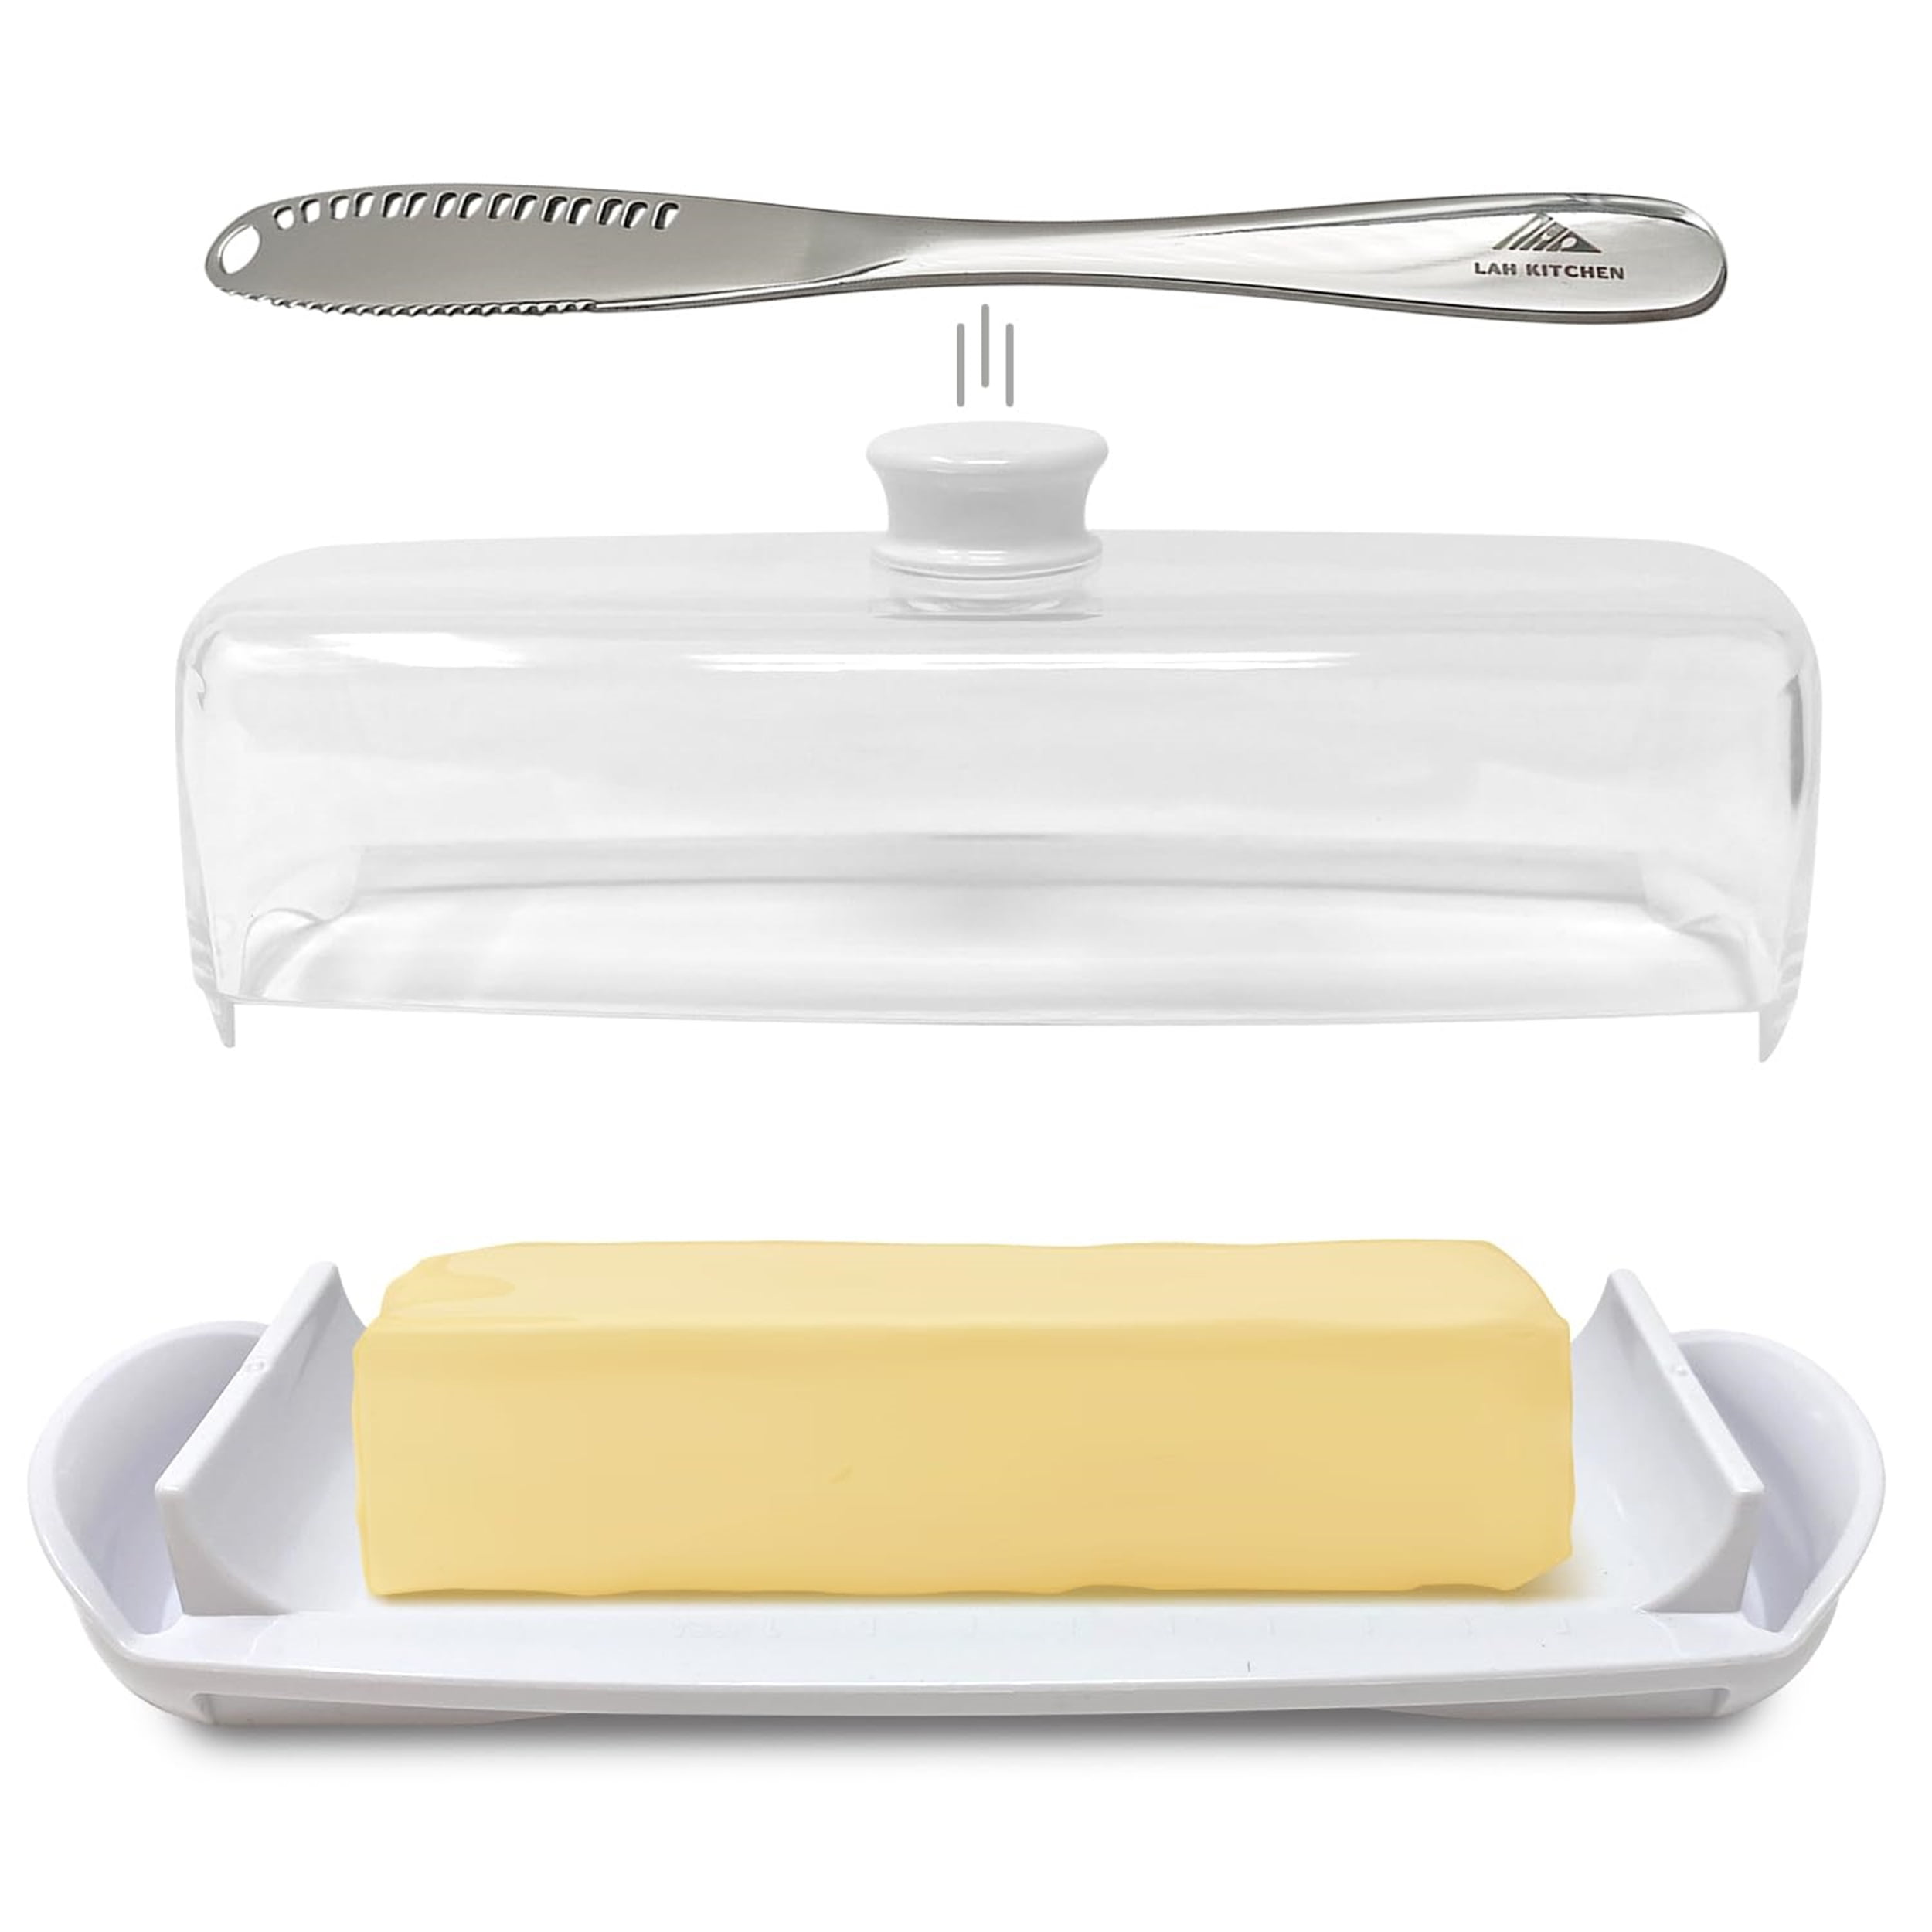 Rubbermaid 1777193 Servin' Saver Butter Dish, Clear Base with